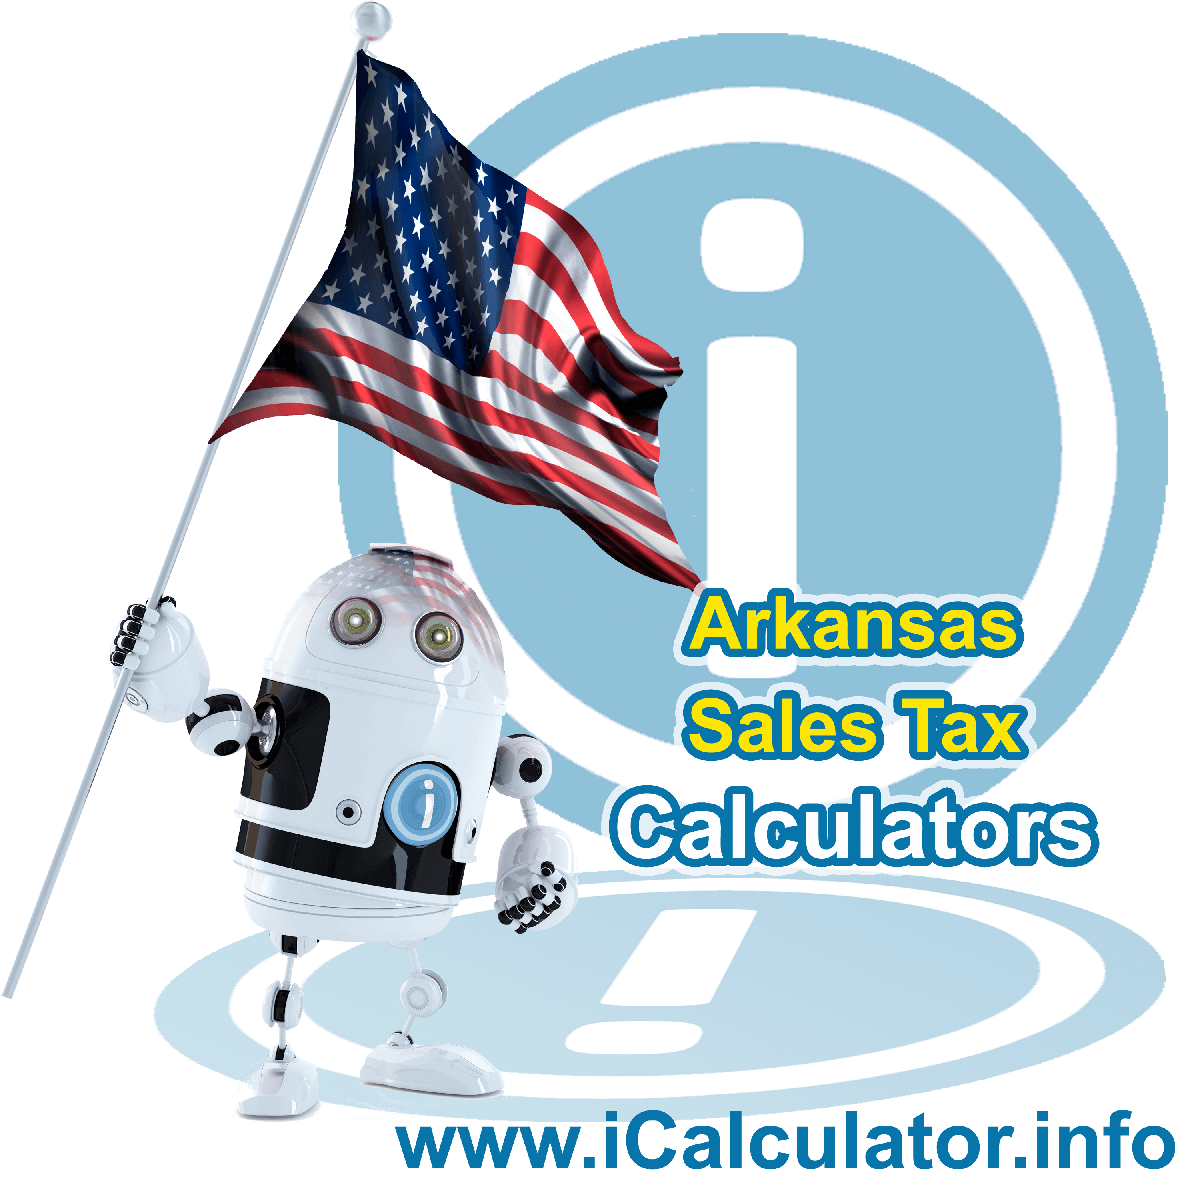 Crawford County Sales Rates: This image illustrates a calculator robot calculating Crawford County sales tax manually using the Crawford County Sales Tax Formula. You can use this information to calculate Crawford County Sales Tax manually or use the Crawford County Sales Tax Calculator to calculate sales tax online.